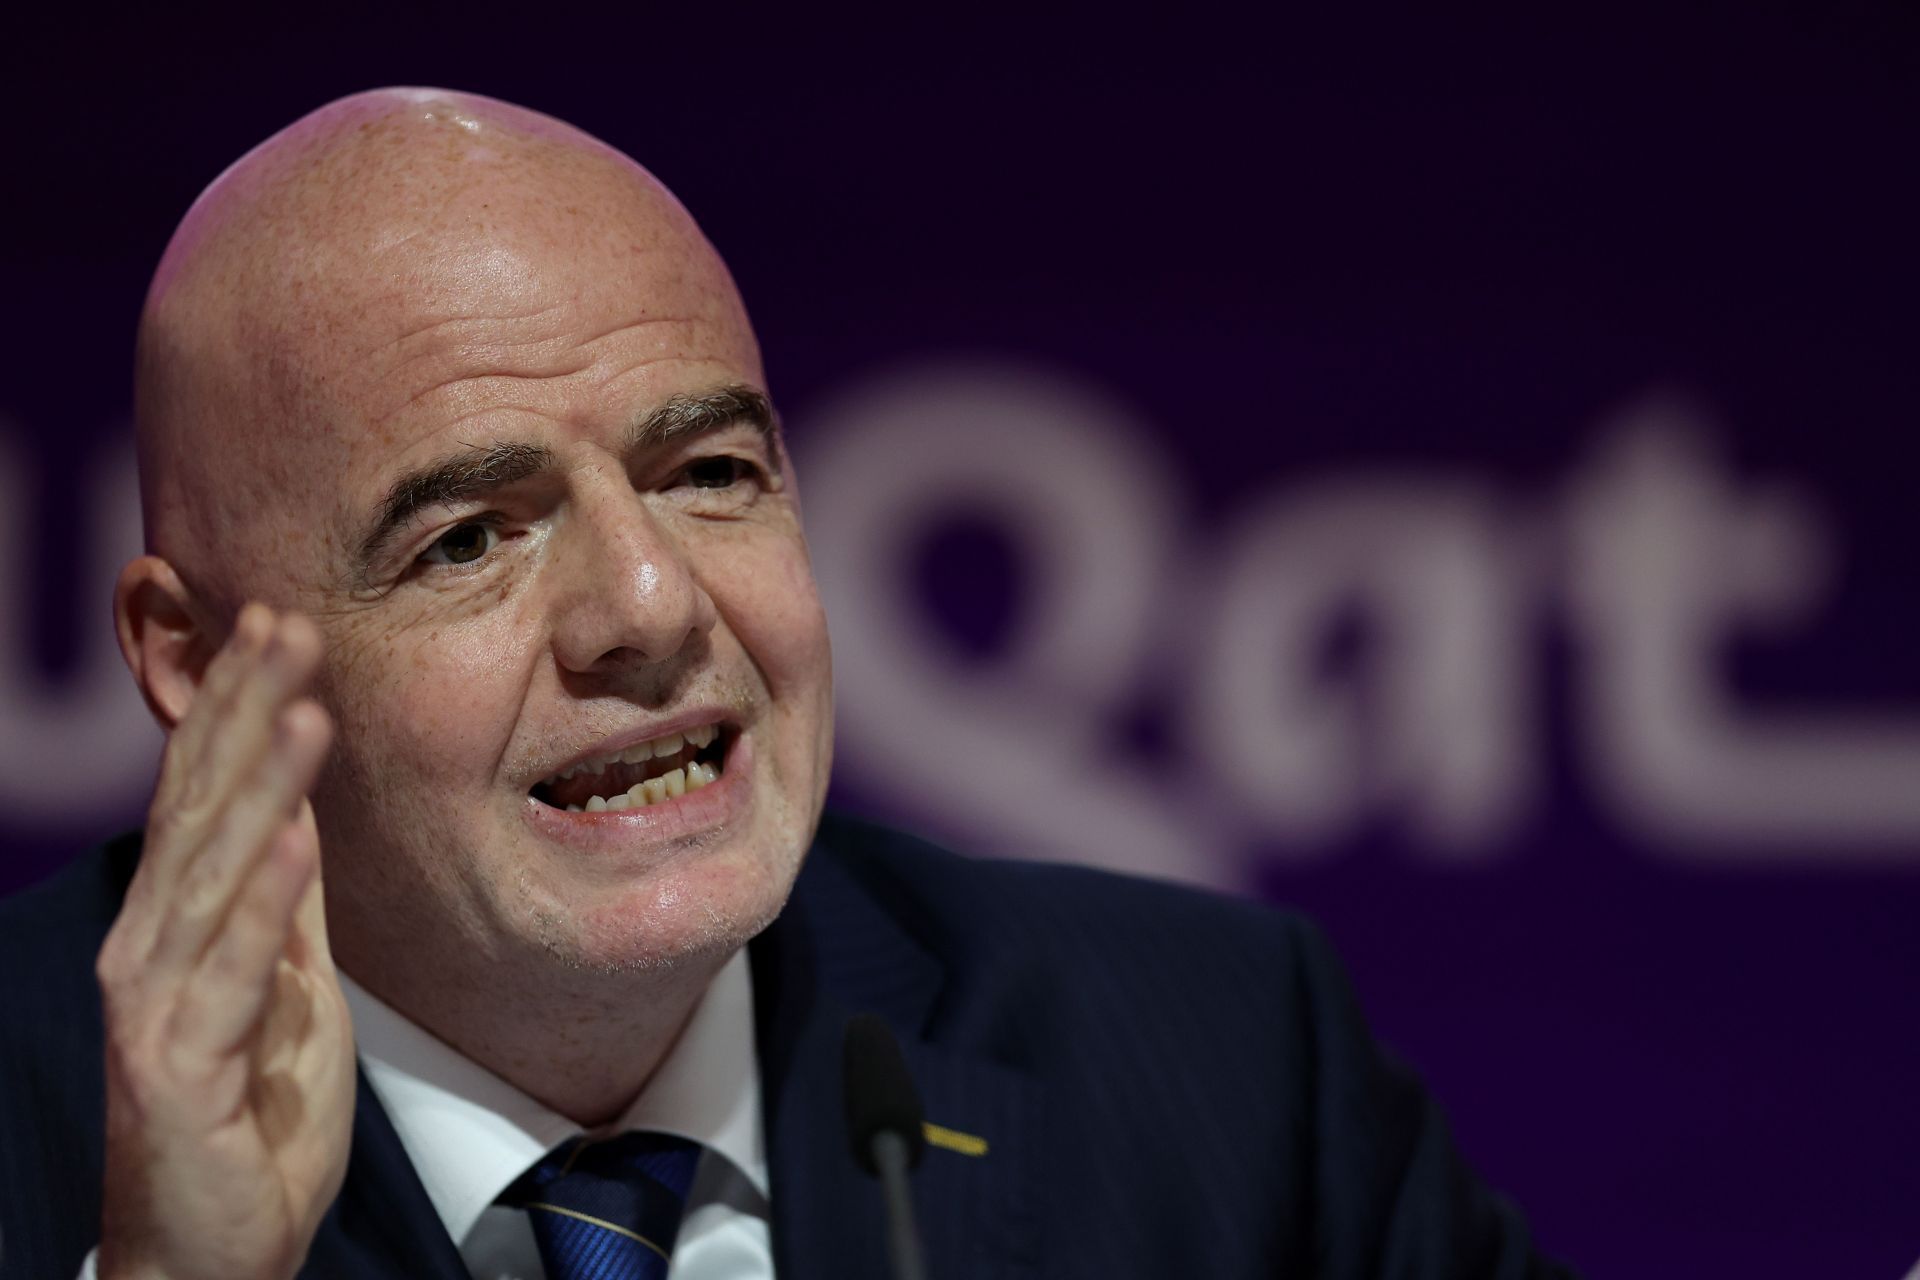 Gianni Infantino speaks ahead of Opening Match - FIFA World Cup Qatar 2022.